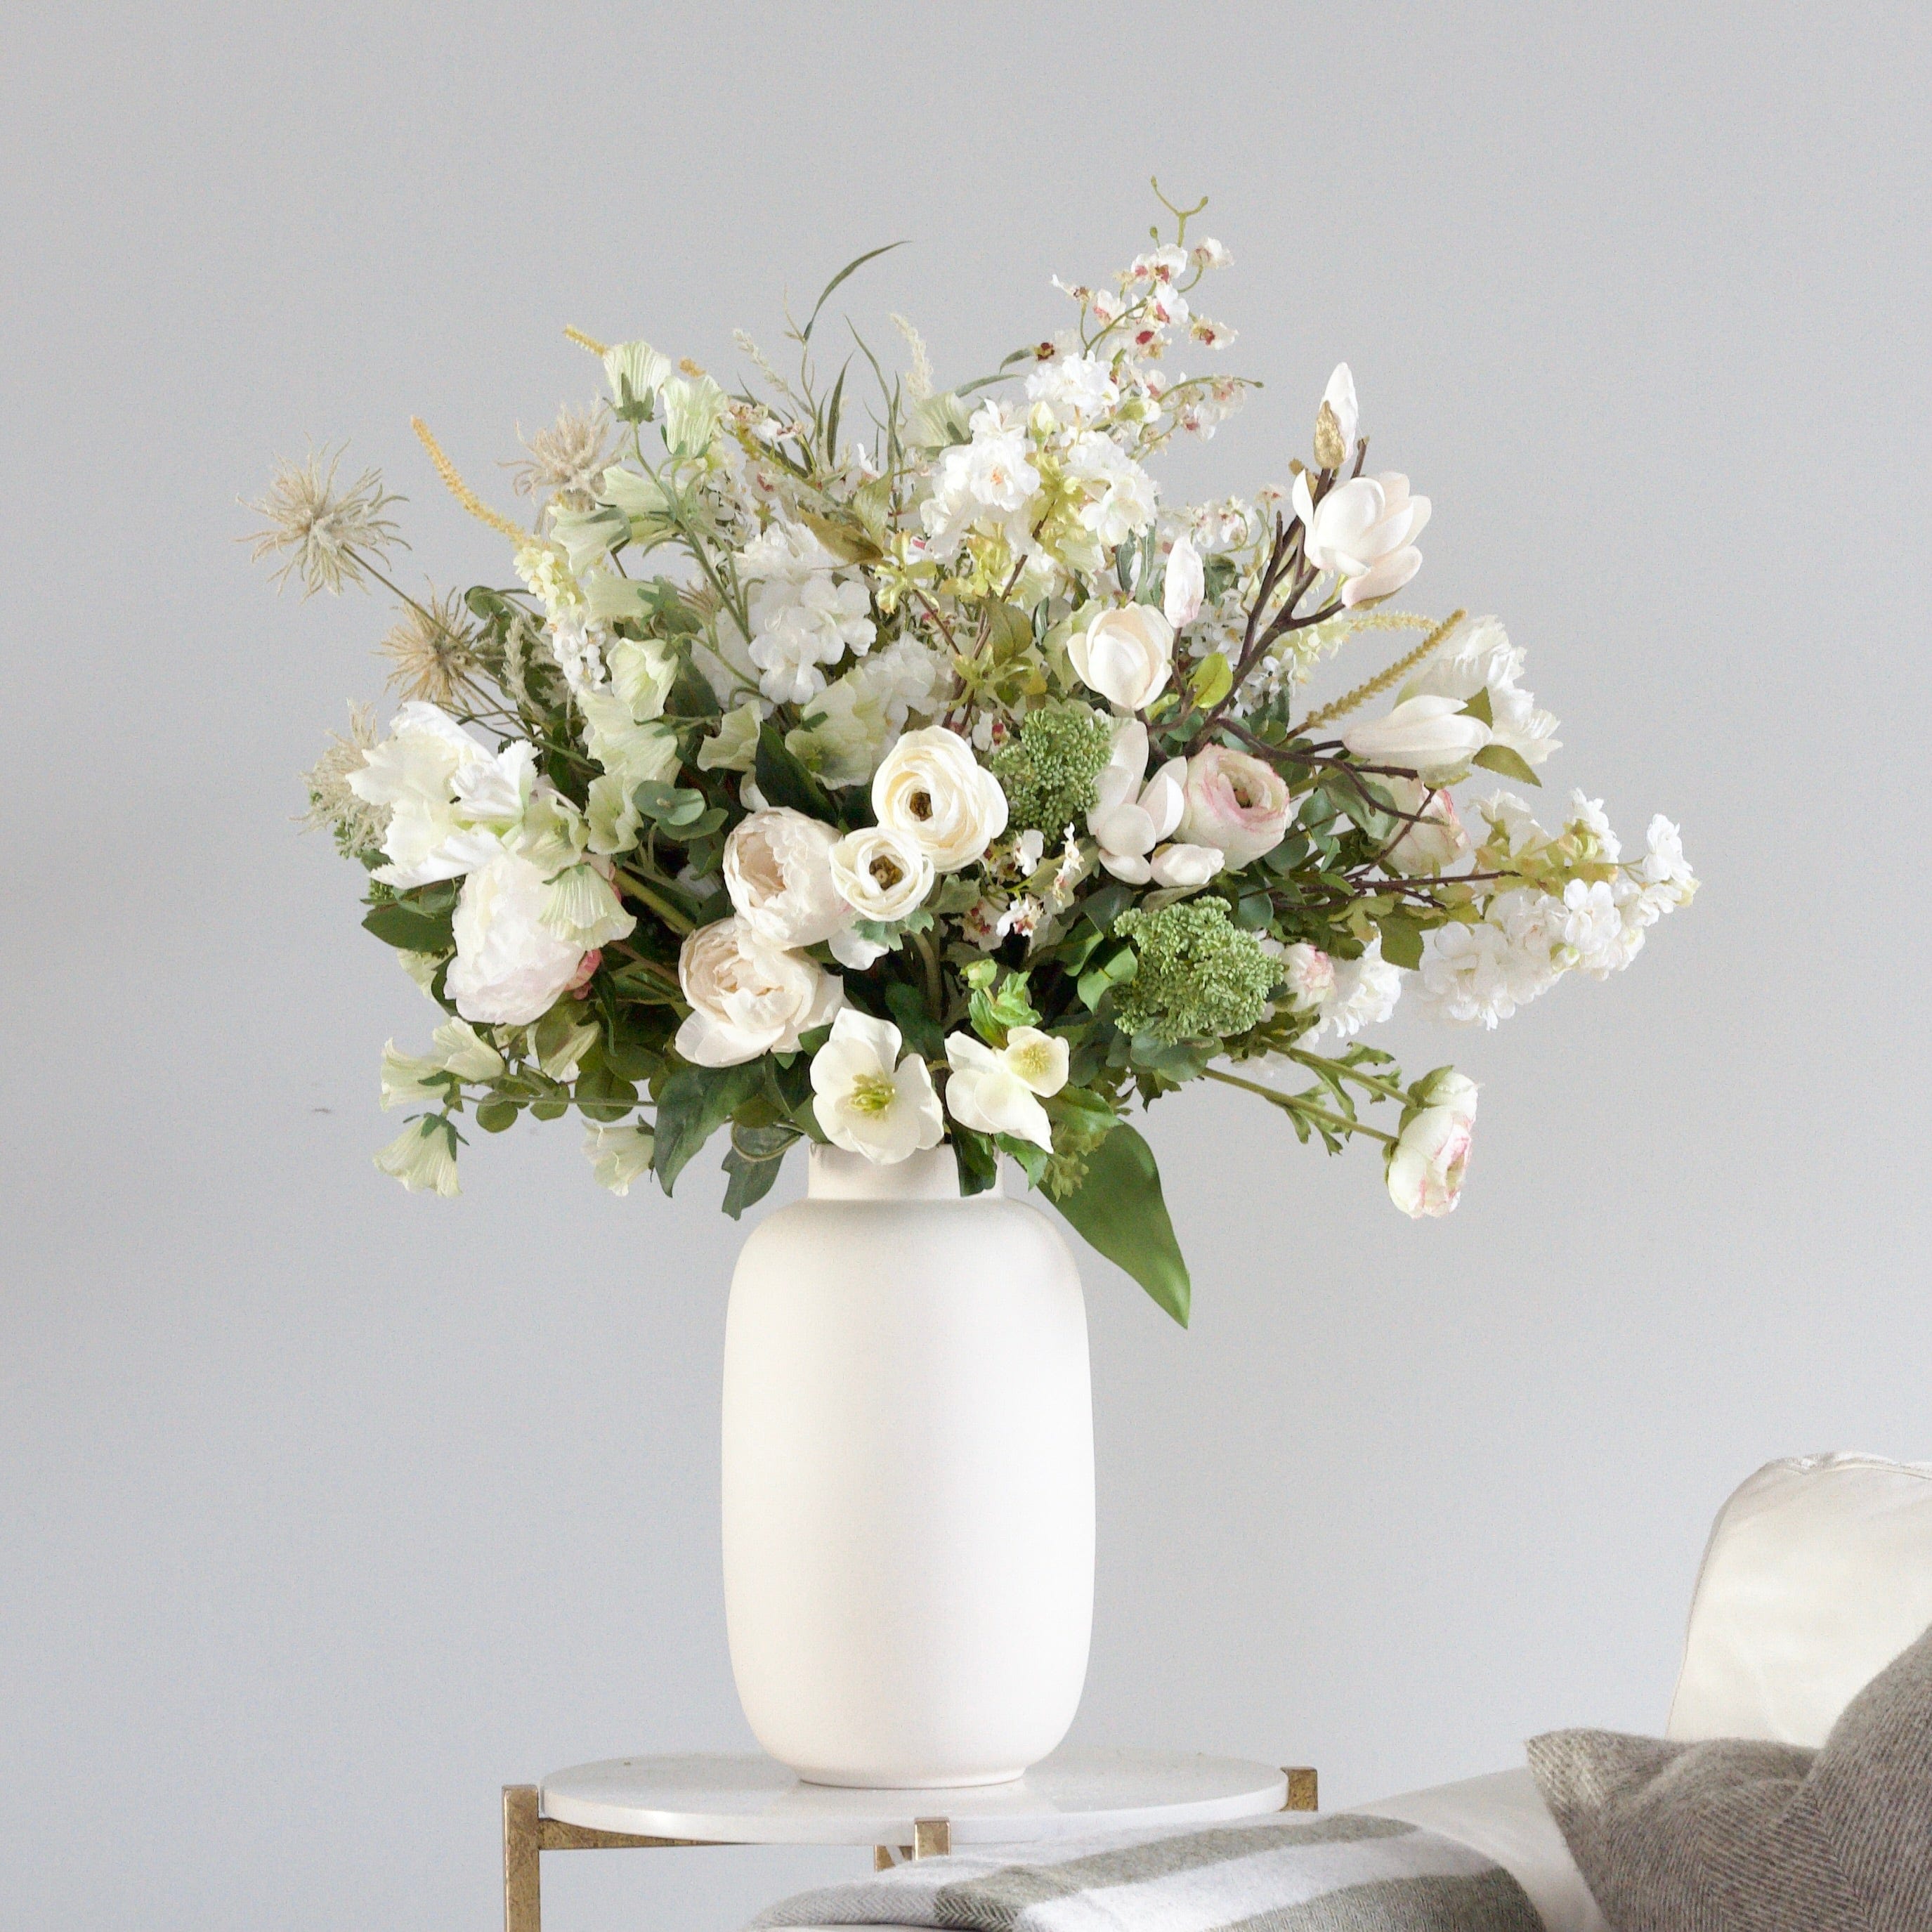 Luxury Lifelike Realistic Artificial Fabric Silk Blooms with Foliage Buy Online from The Faux Flower Company | Spring Splendour styled in Kingham Vase ABP04B3